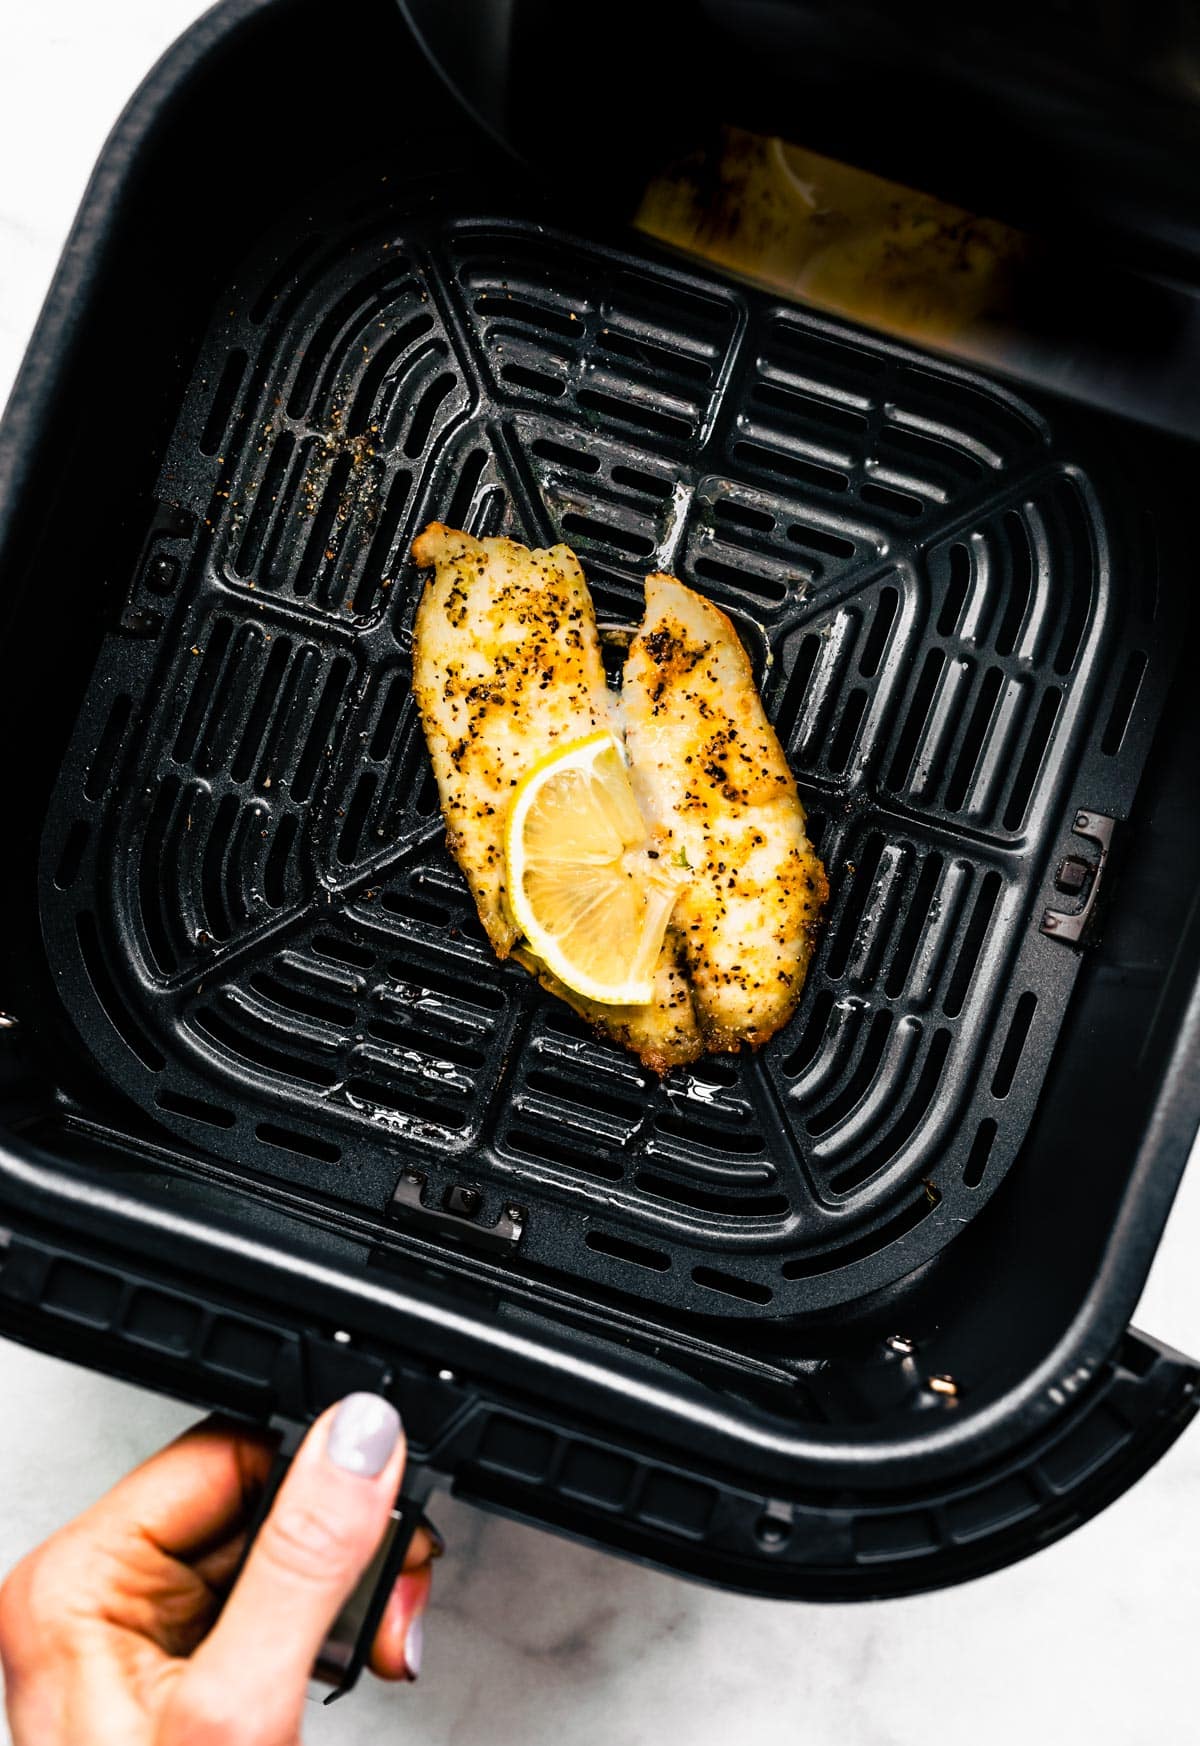 Overhead shot of a cooked tilapia fillet topped with a lemon in an air fryer